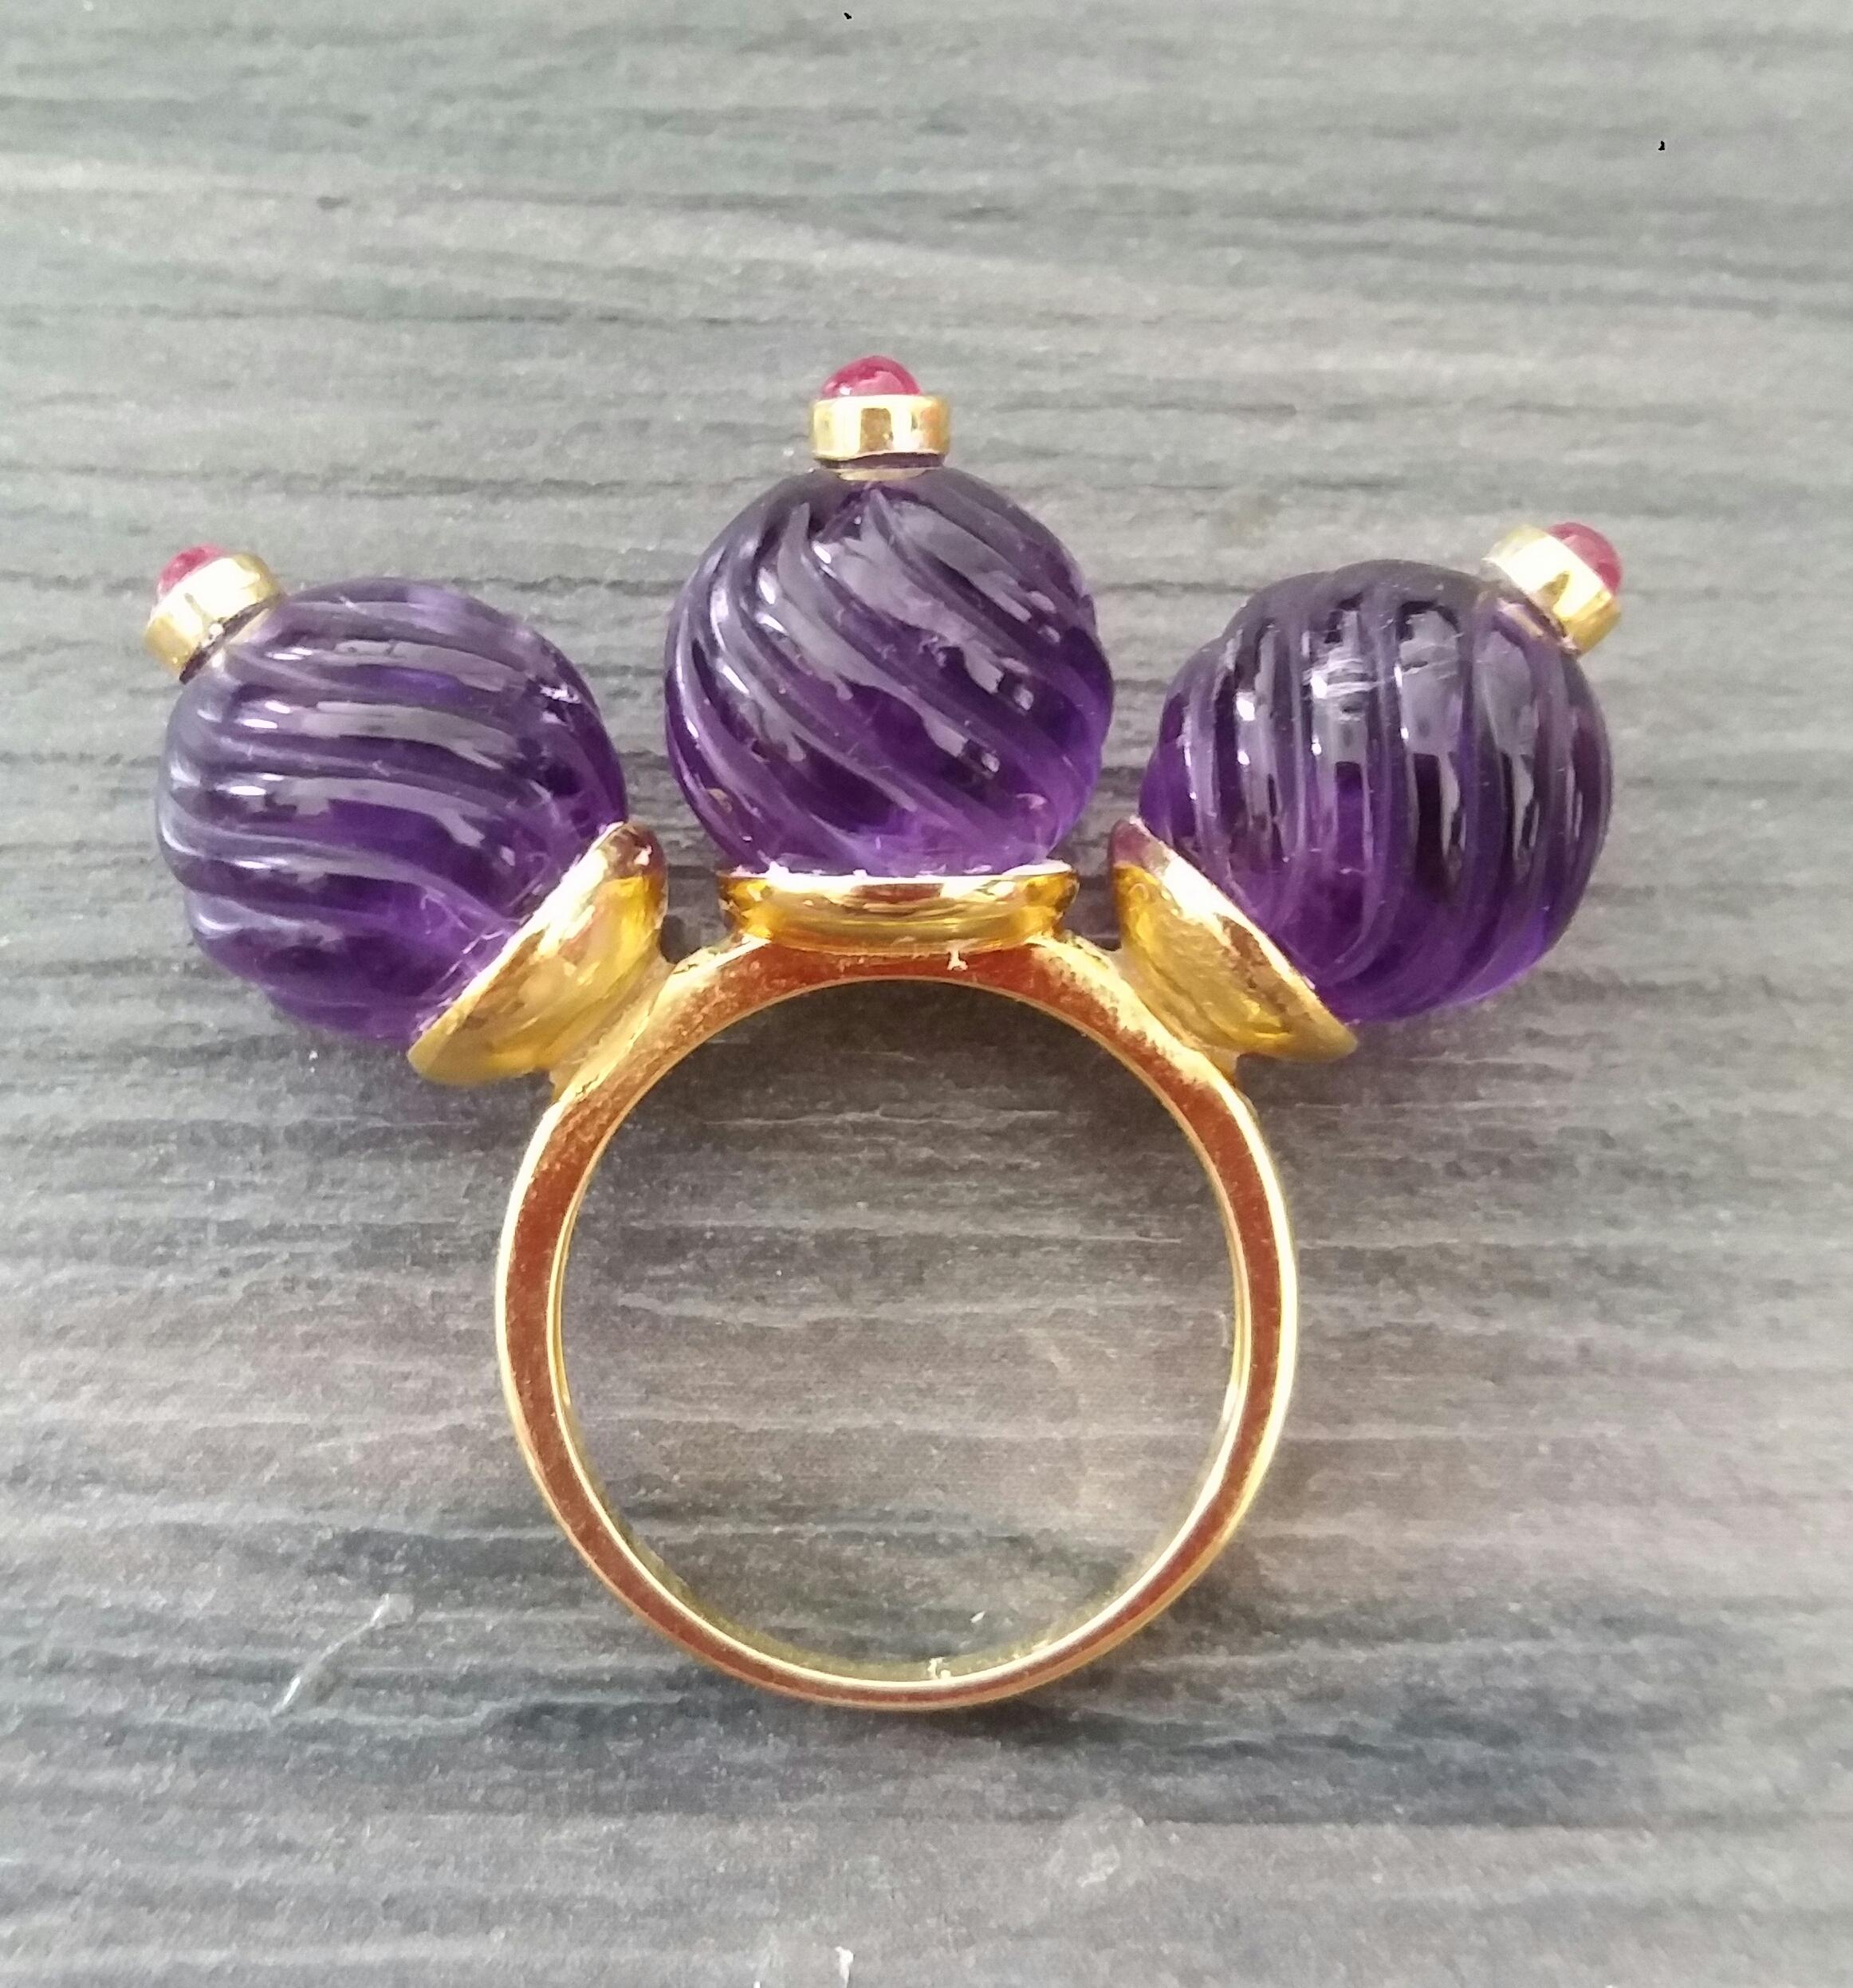 Unique and Classic Cocktail Ring composed of 3 engraved Amethyst spheres of 12 mm. in diameter surmounted by 3 small Ruby cabochons set in yellow gold bezels,all set on a 3 cup yellow gold shank.
In 1978 our workshop started in Italy to make